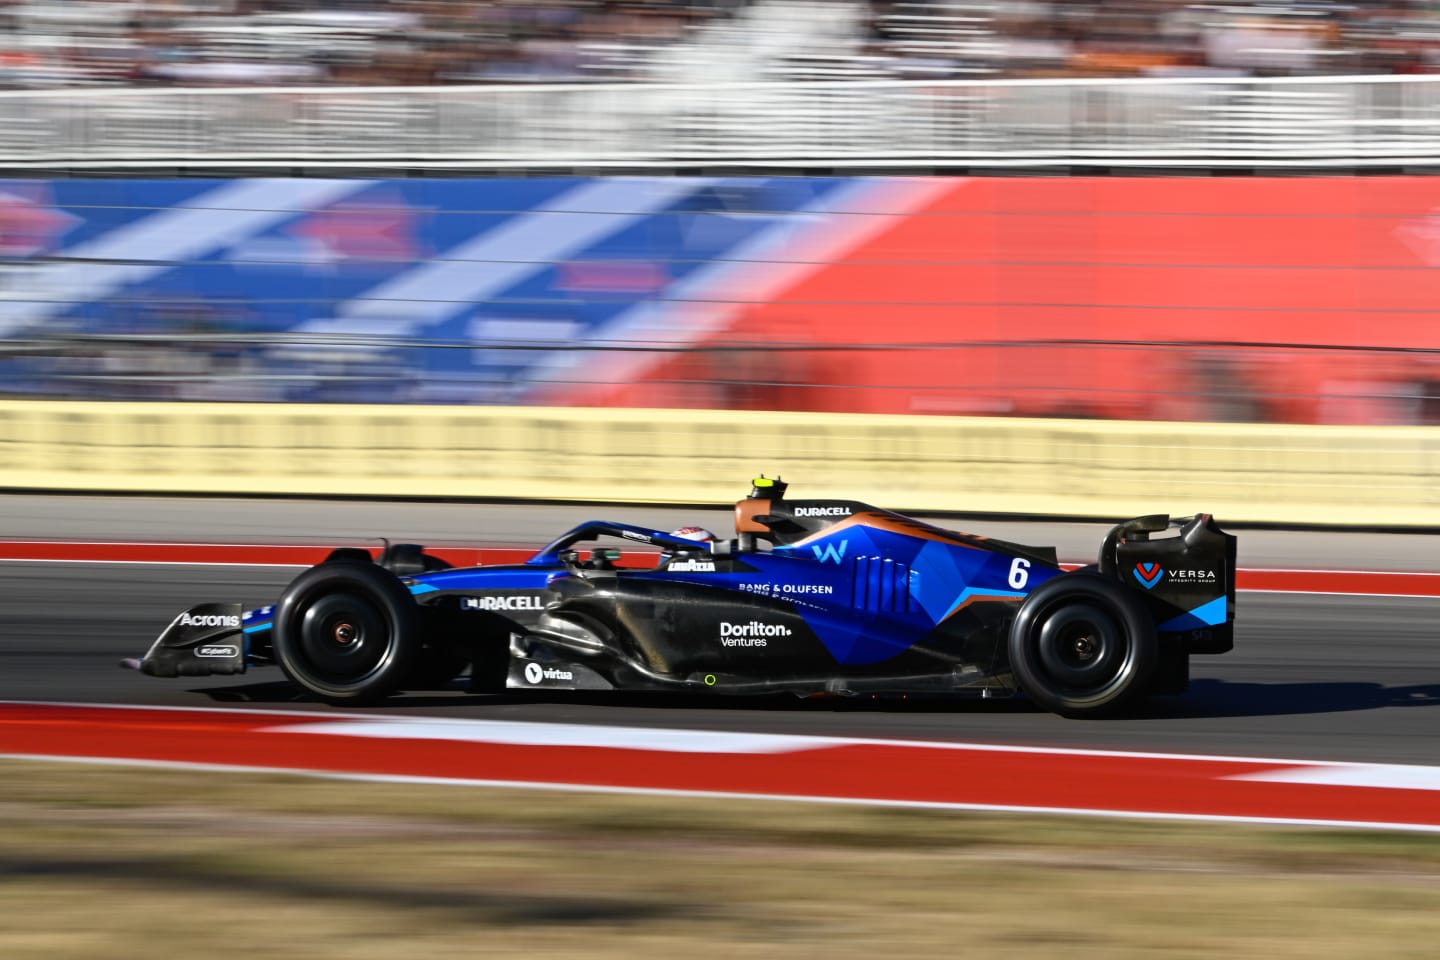 AUSTIN, TX - OCTOBER 21: Williams driver Nicholas Latifi of Team Canada enters turn 19 during F1 US Grand Prix prep day at Circuit of the Americas on October 21, 2022 in Austin, TX. (Photo by Ken Murray/Icon Sportswire via Getty Images)